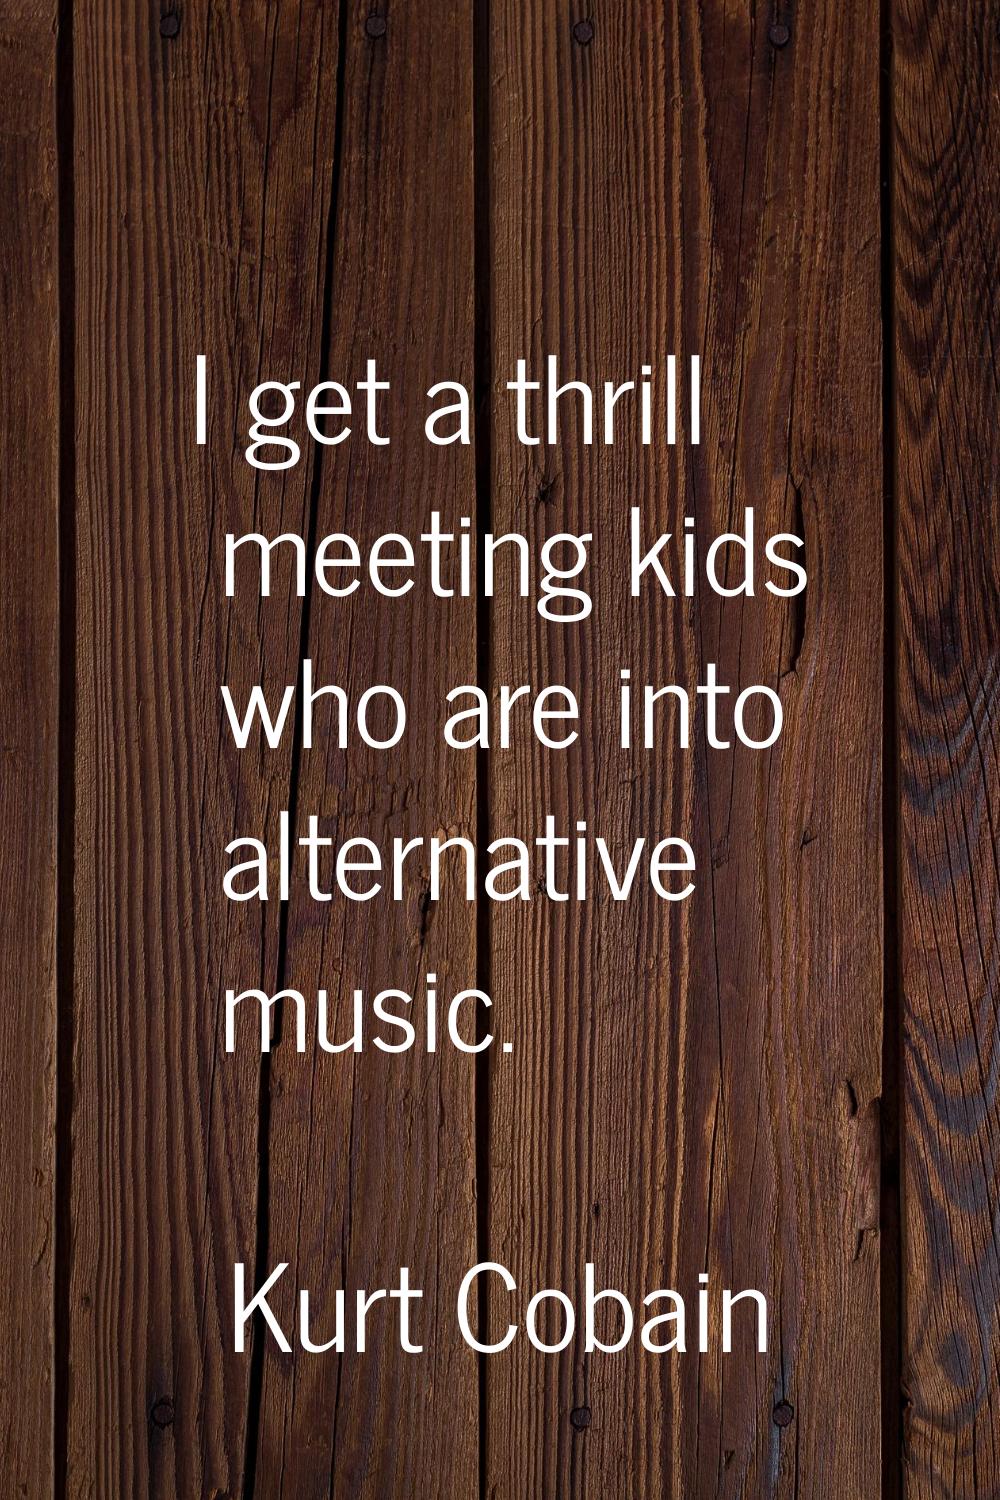 I get a thrill meeting kids who are into alternative music.